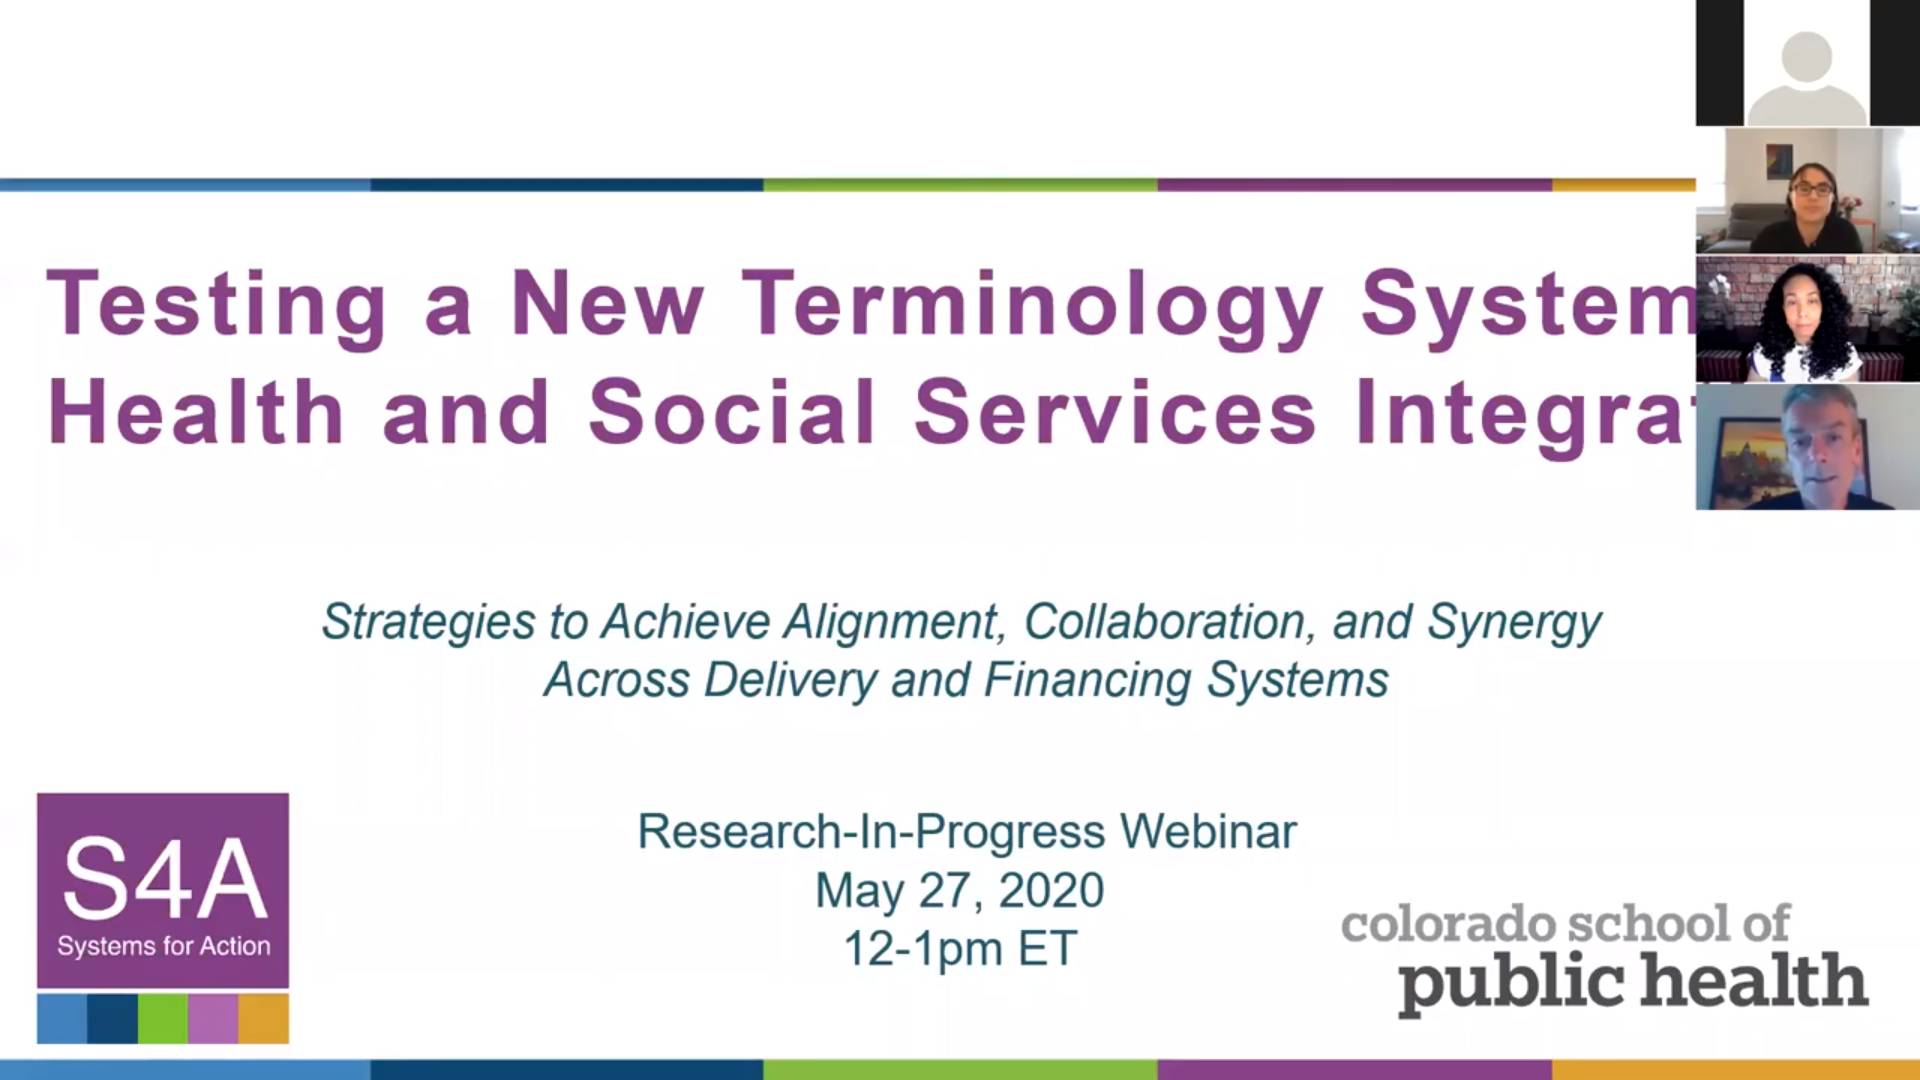 Testing a New Terminology System for Health and Social Services Integration